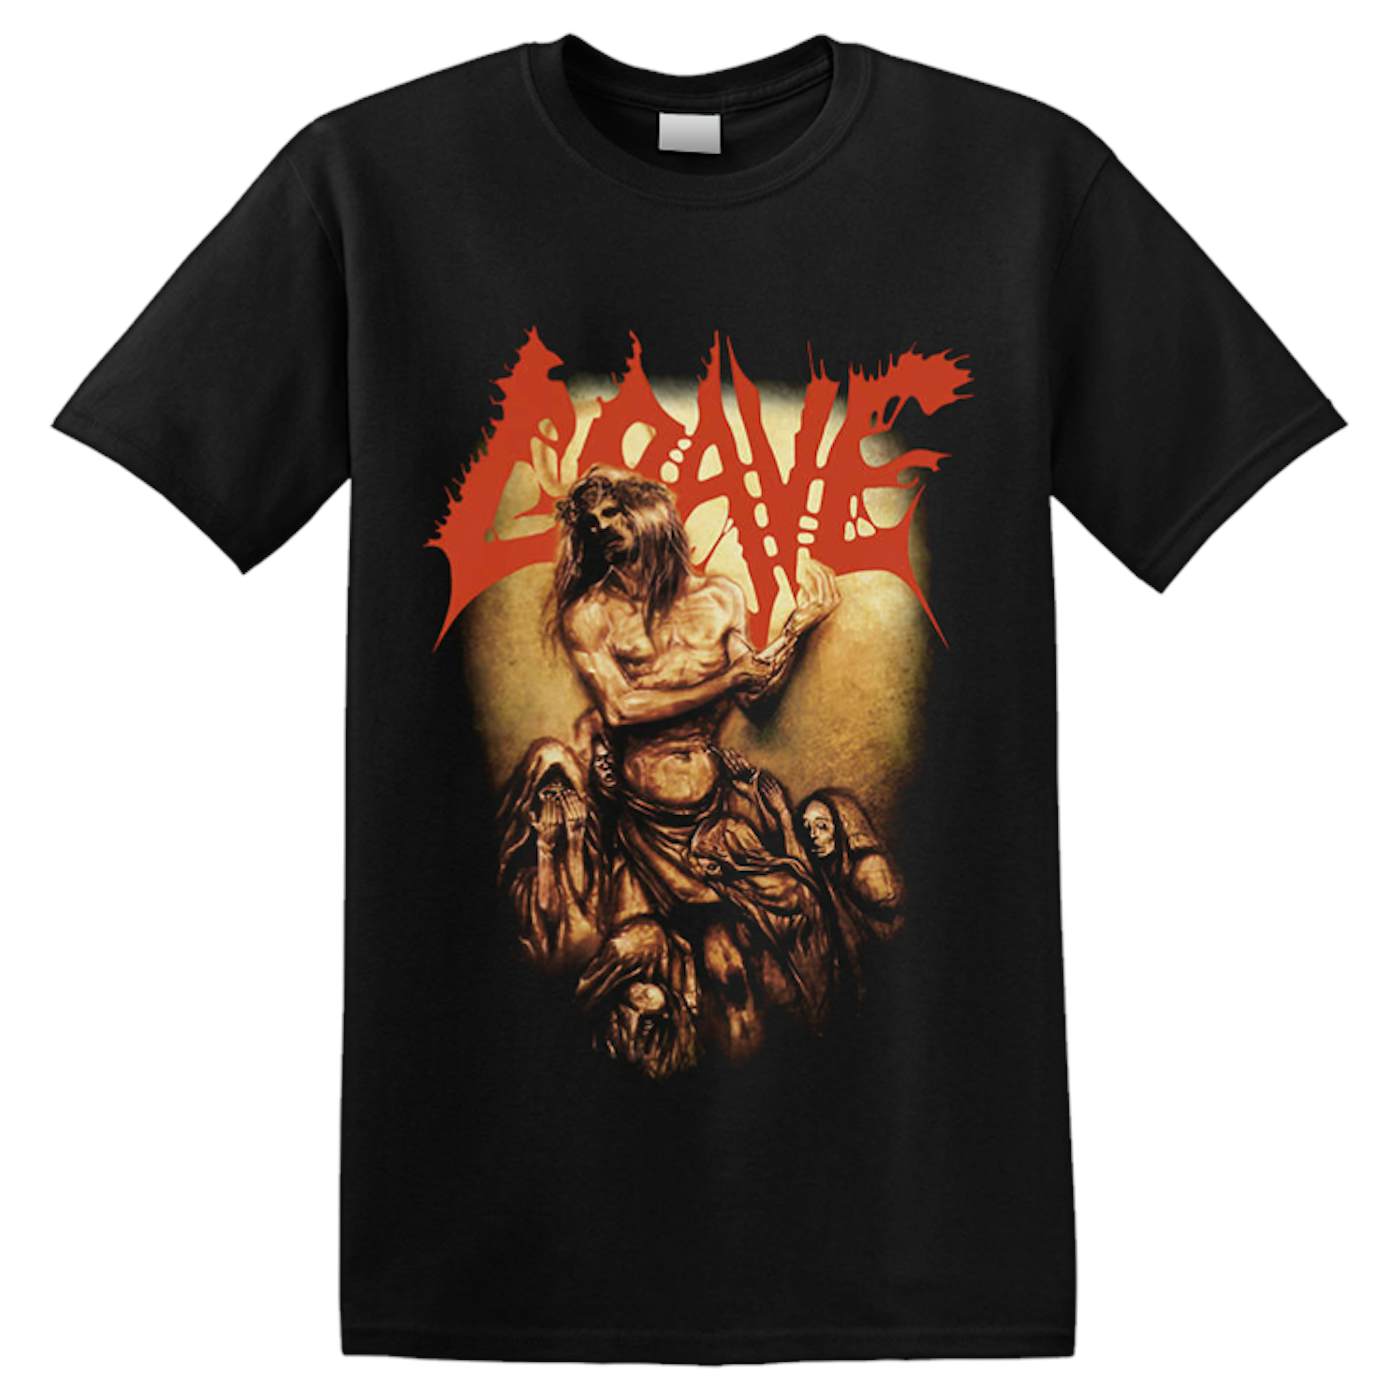 GRAVE - 'And Here I Die Satisfied' T-Shirt